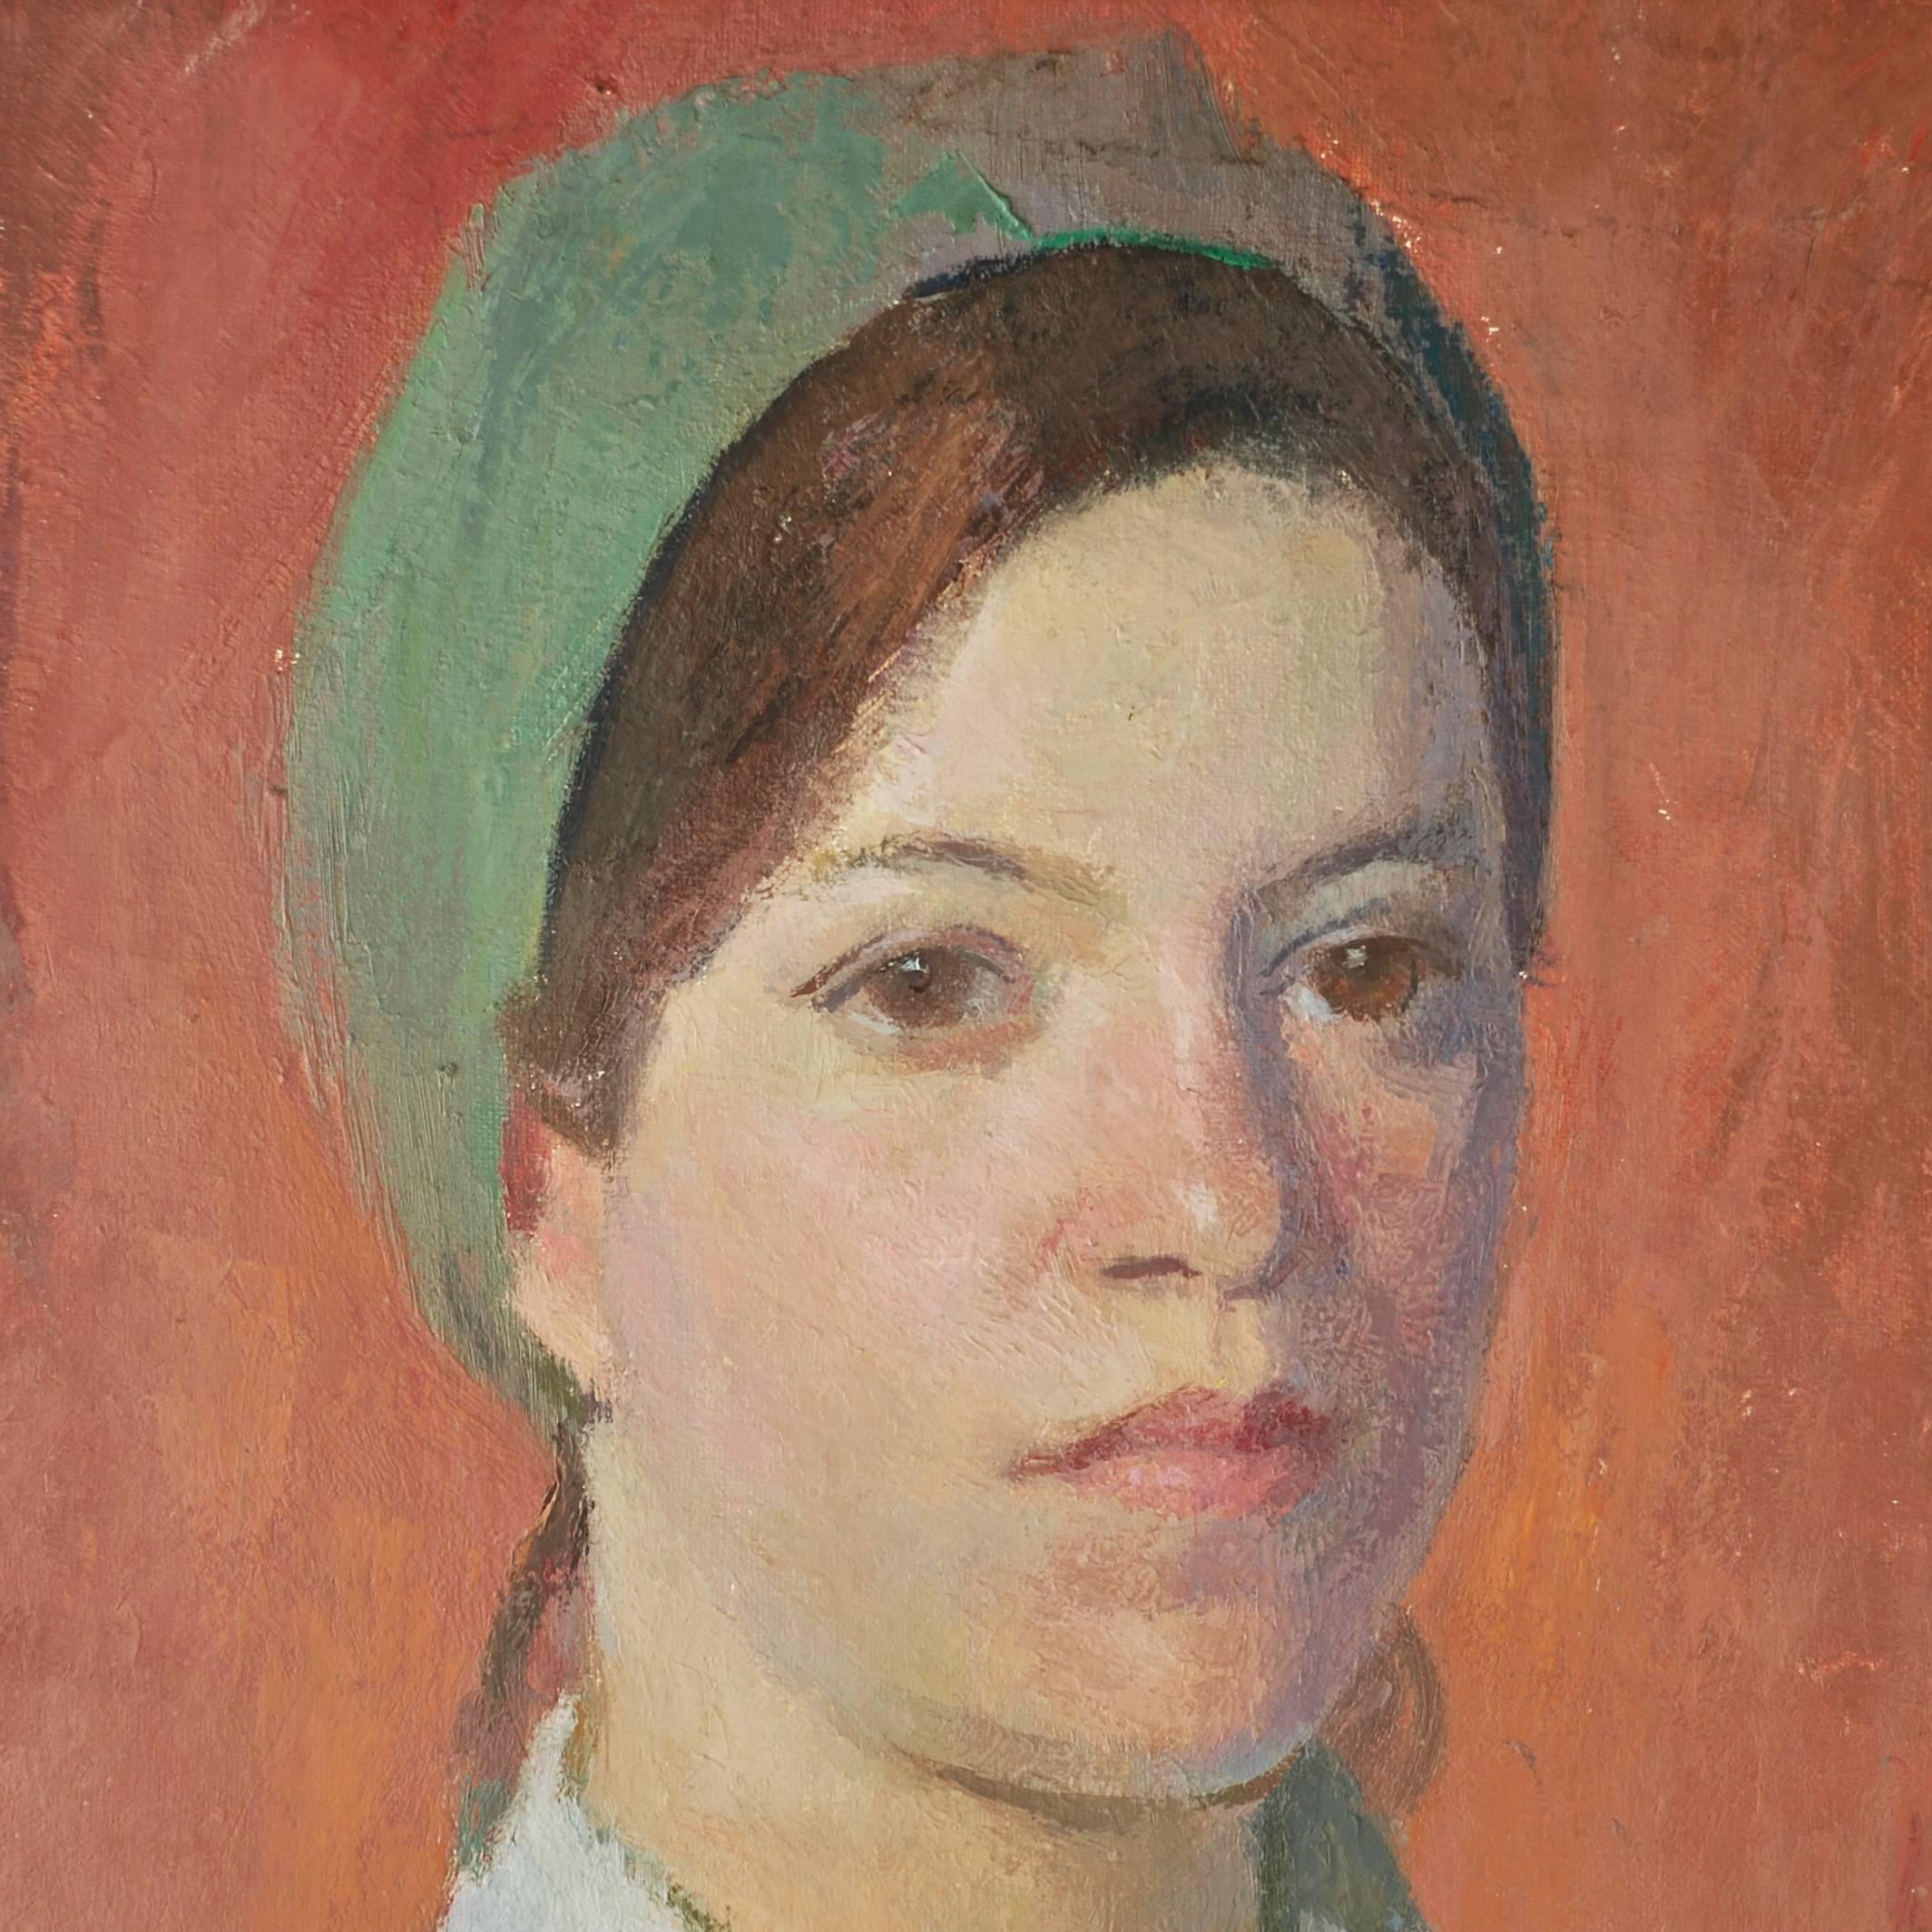 This oil on canvas portrait was executed by well listed artist Henry Hensche (1899-1992.) A gifted painter widely recognized as an unparalleled colorist, Hensche began his studies at the Art Institute of Chicago and moved to the famed Cape Cod